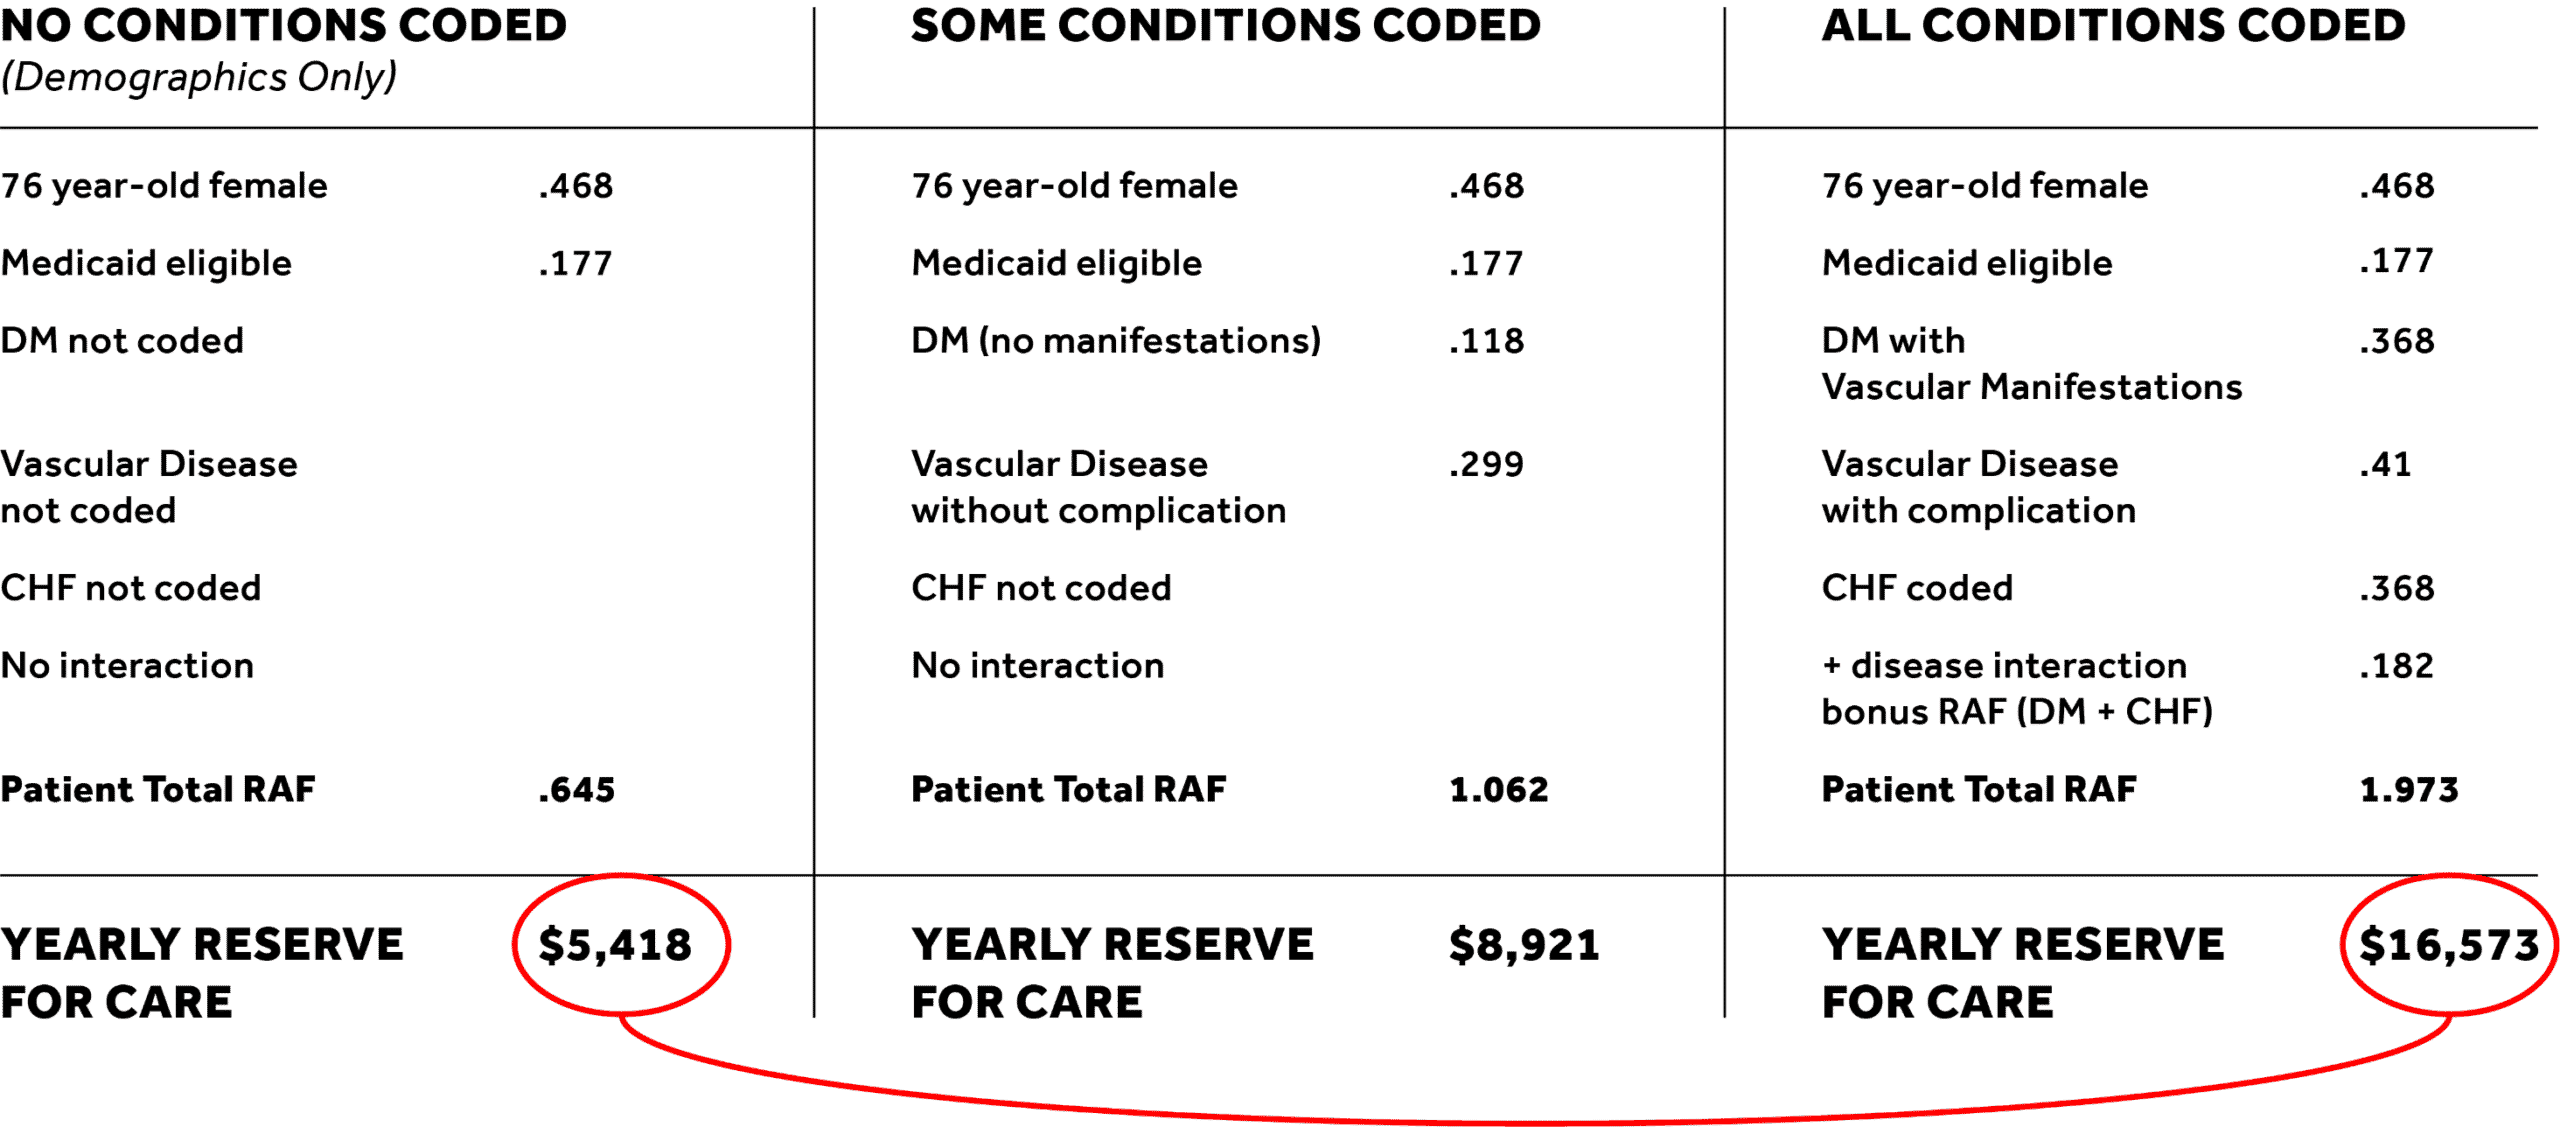 Coded Conditions Chart